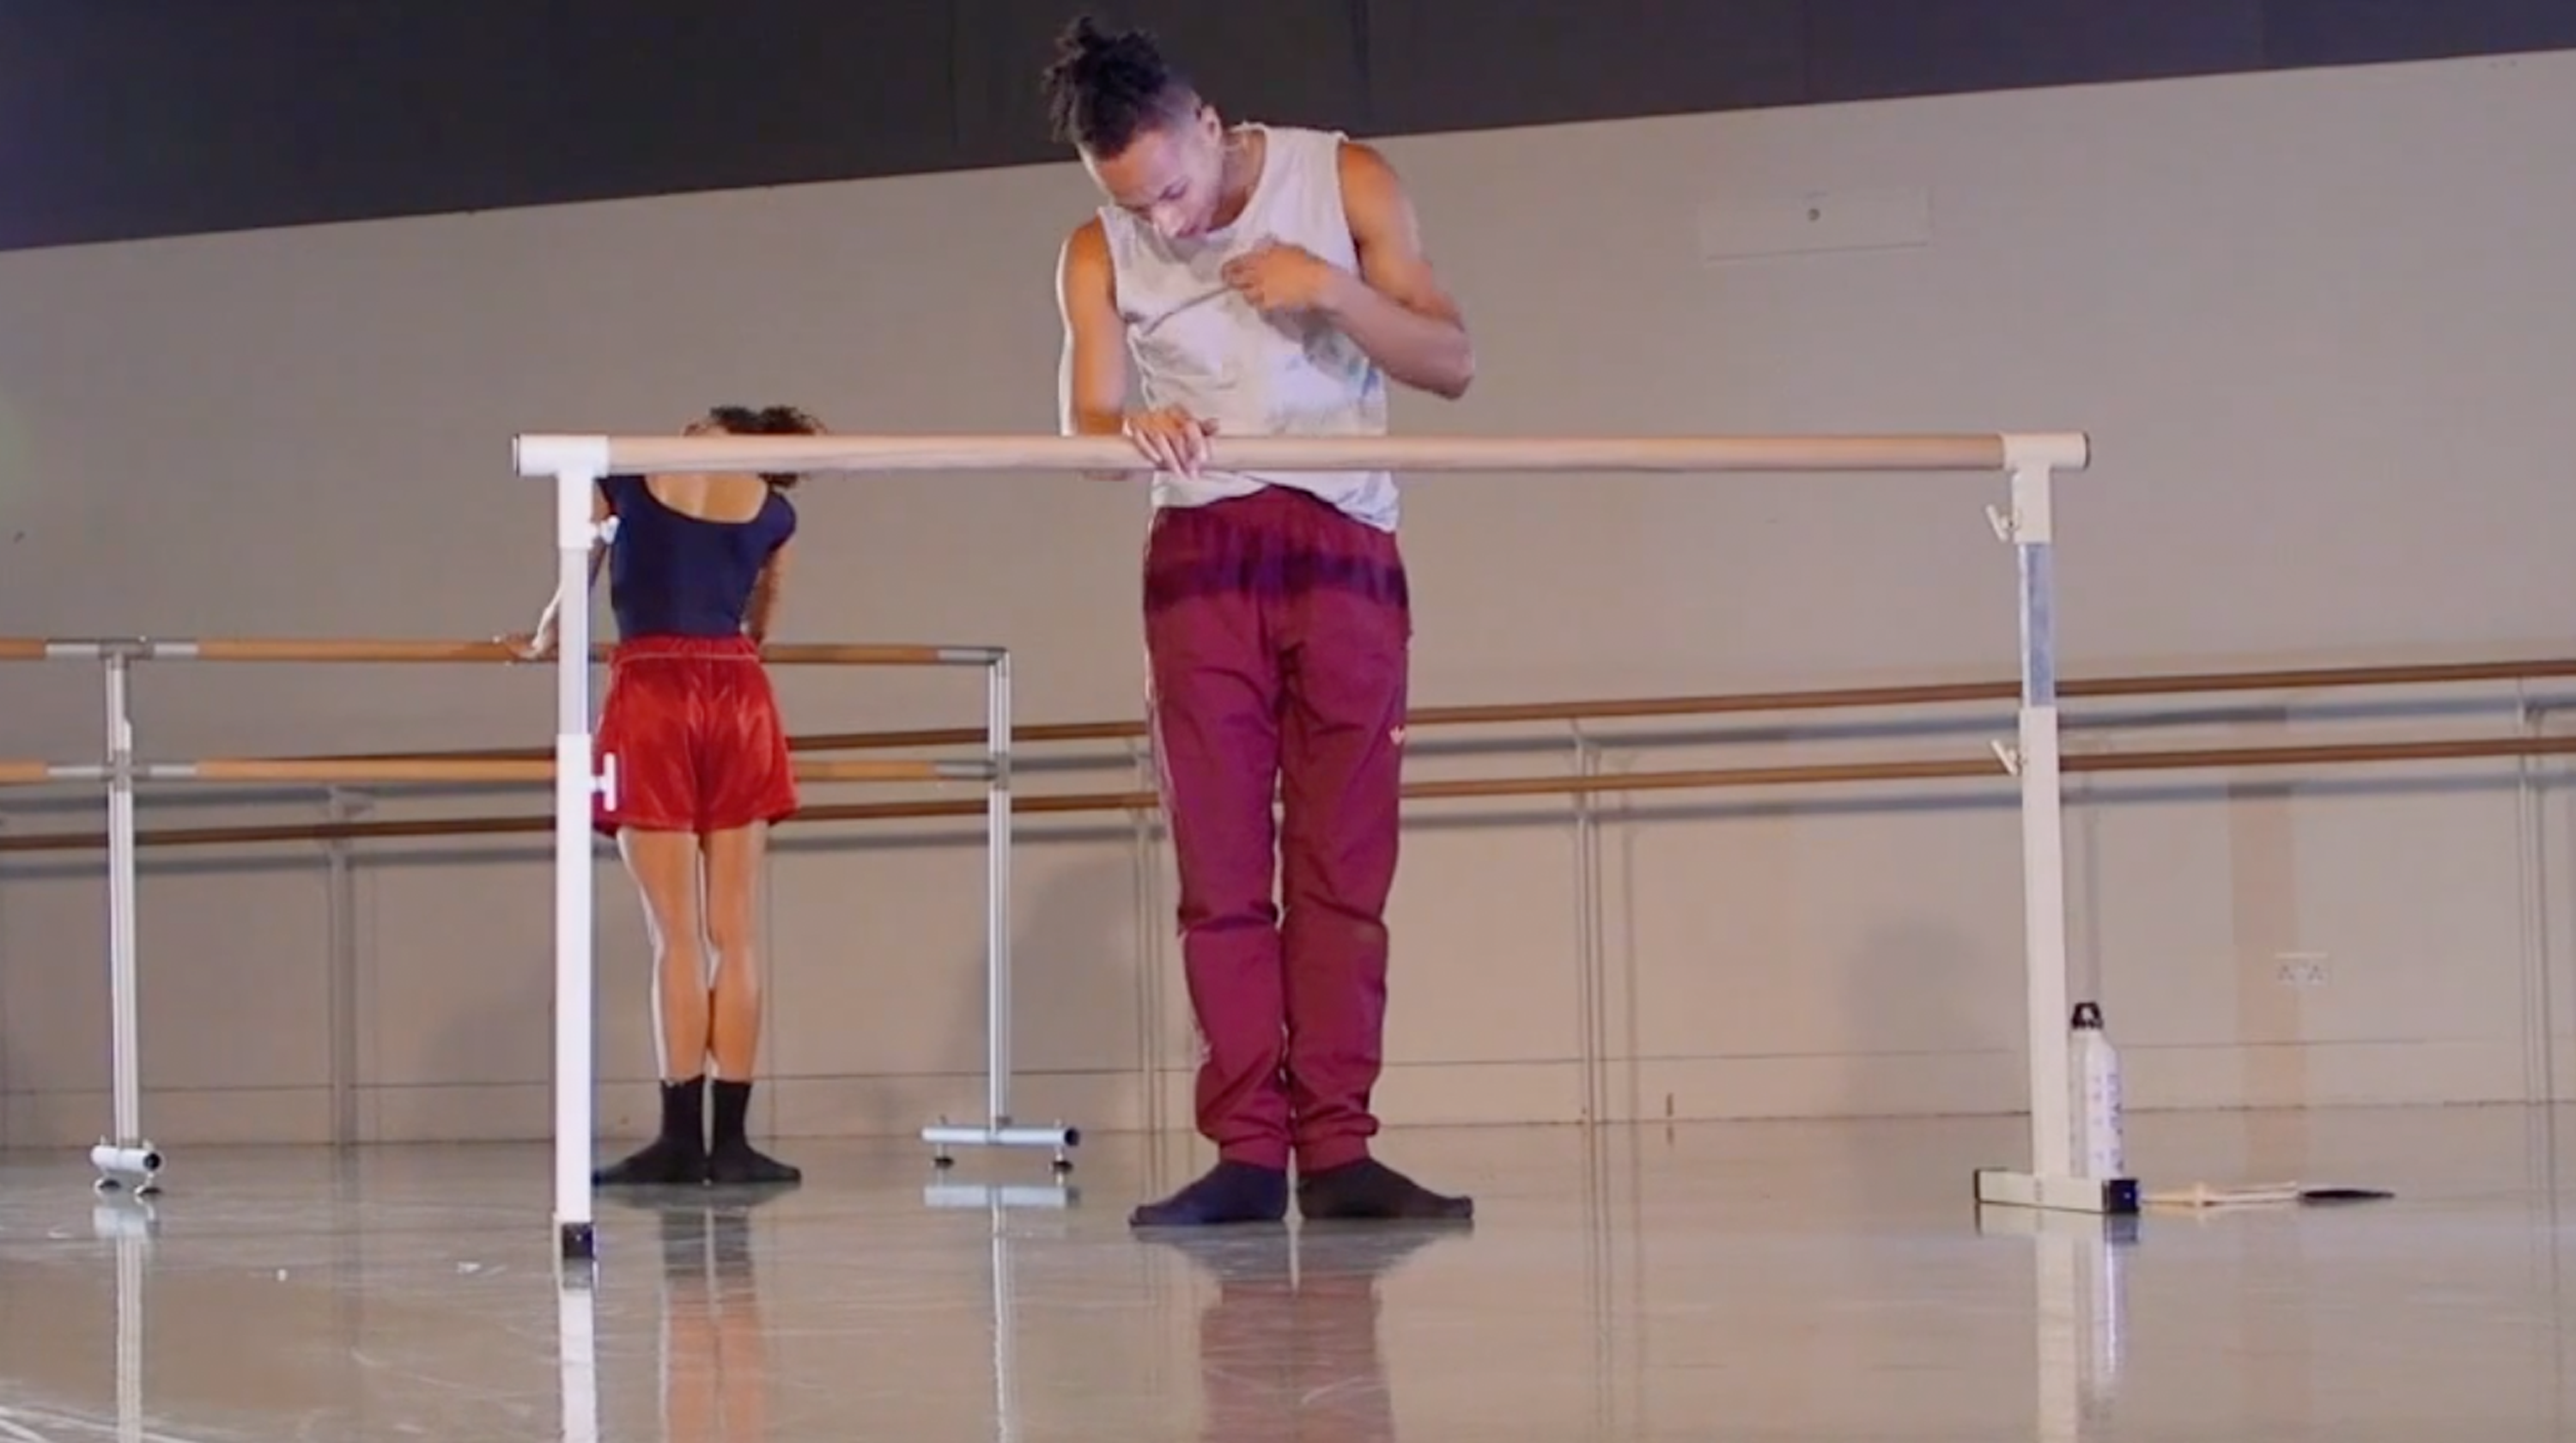 The teacher is holding a barre during an online ballet class. The teacher is a black man wearing red trousers and a grey shirt